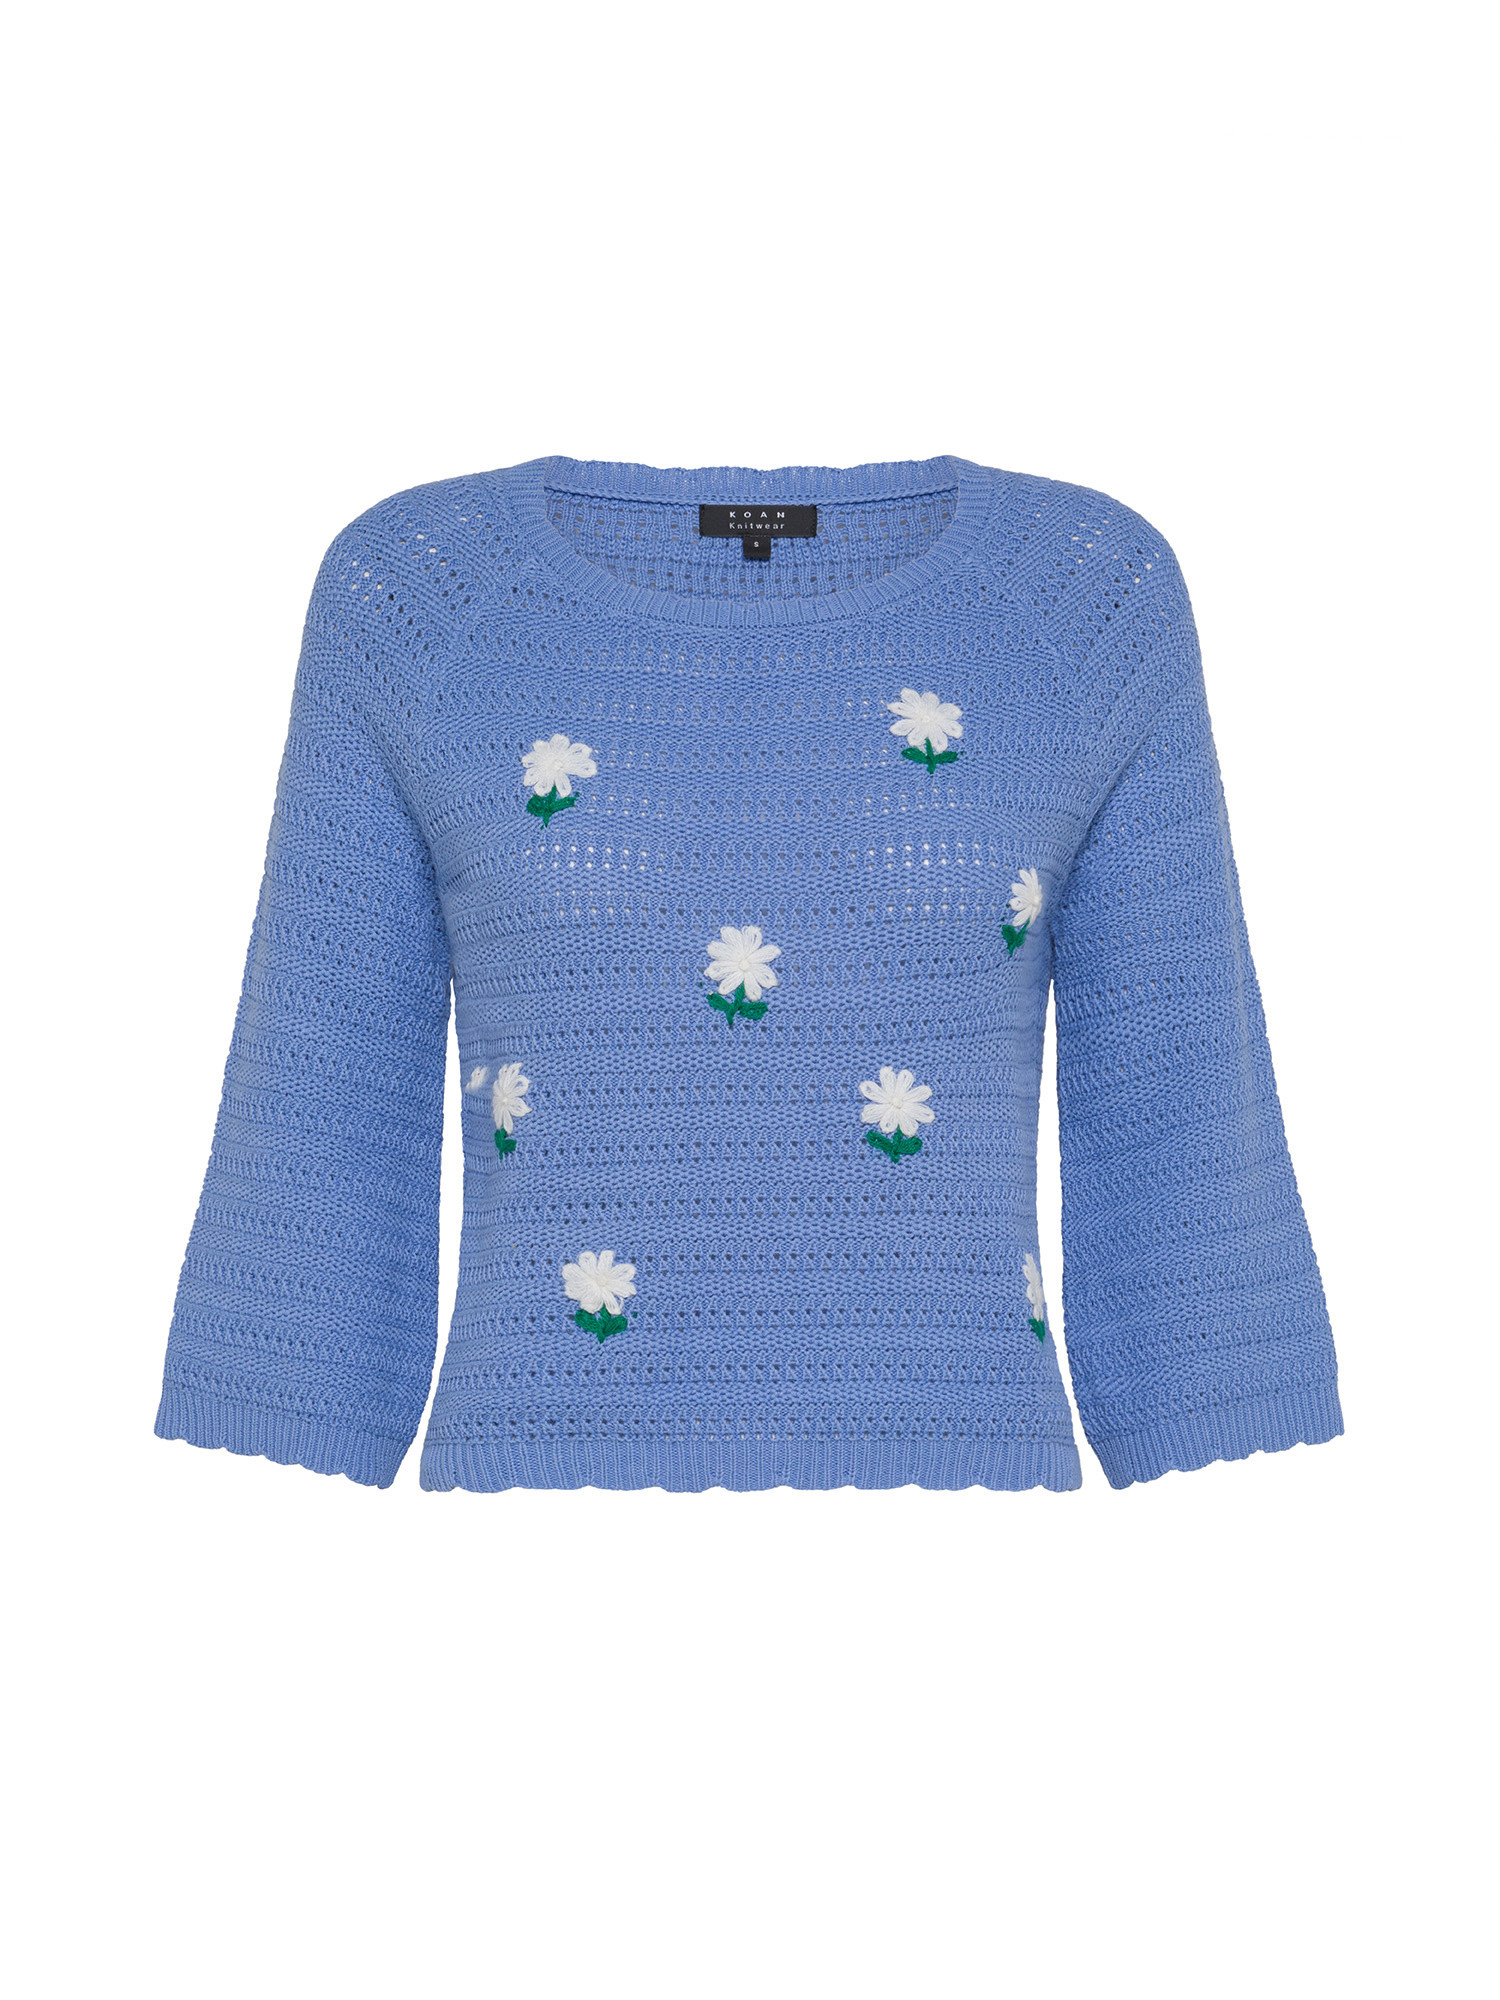 Koan - Fancy stitch pullover in cotton with embroidery, Light Blue, large image number 0